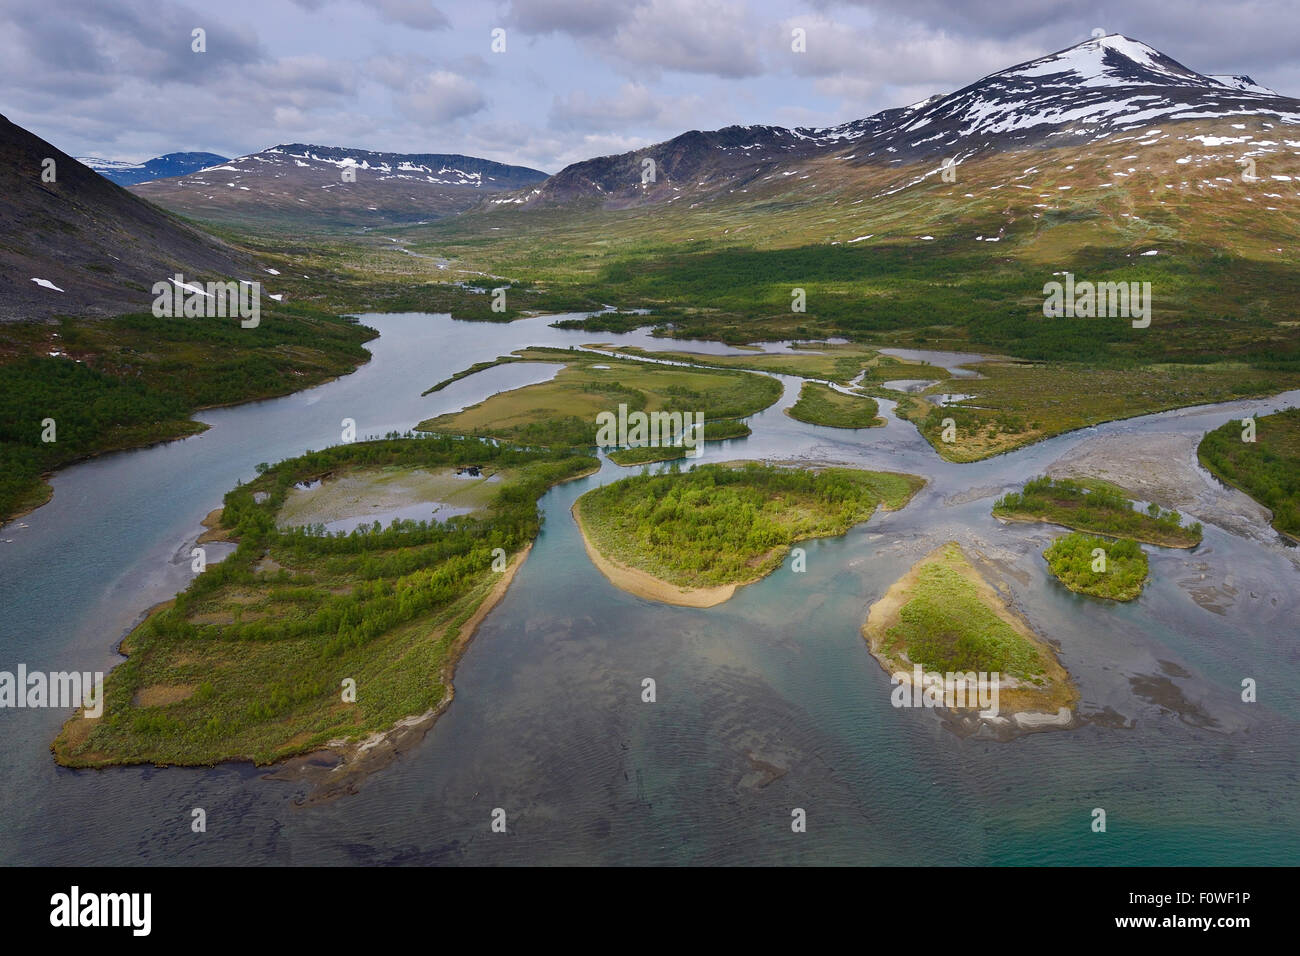 Aerial view of mountainous valley with small islands in the Vietasatno River, Stora Sjofallet National Park, Greater Laponia Rewilding Area, Lapland, Norrbotten, Sweden, June 2013. Stock Photo